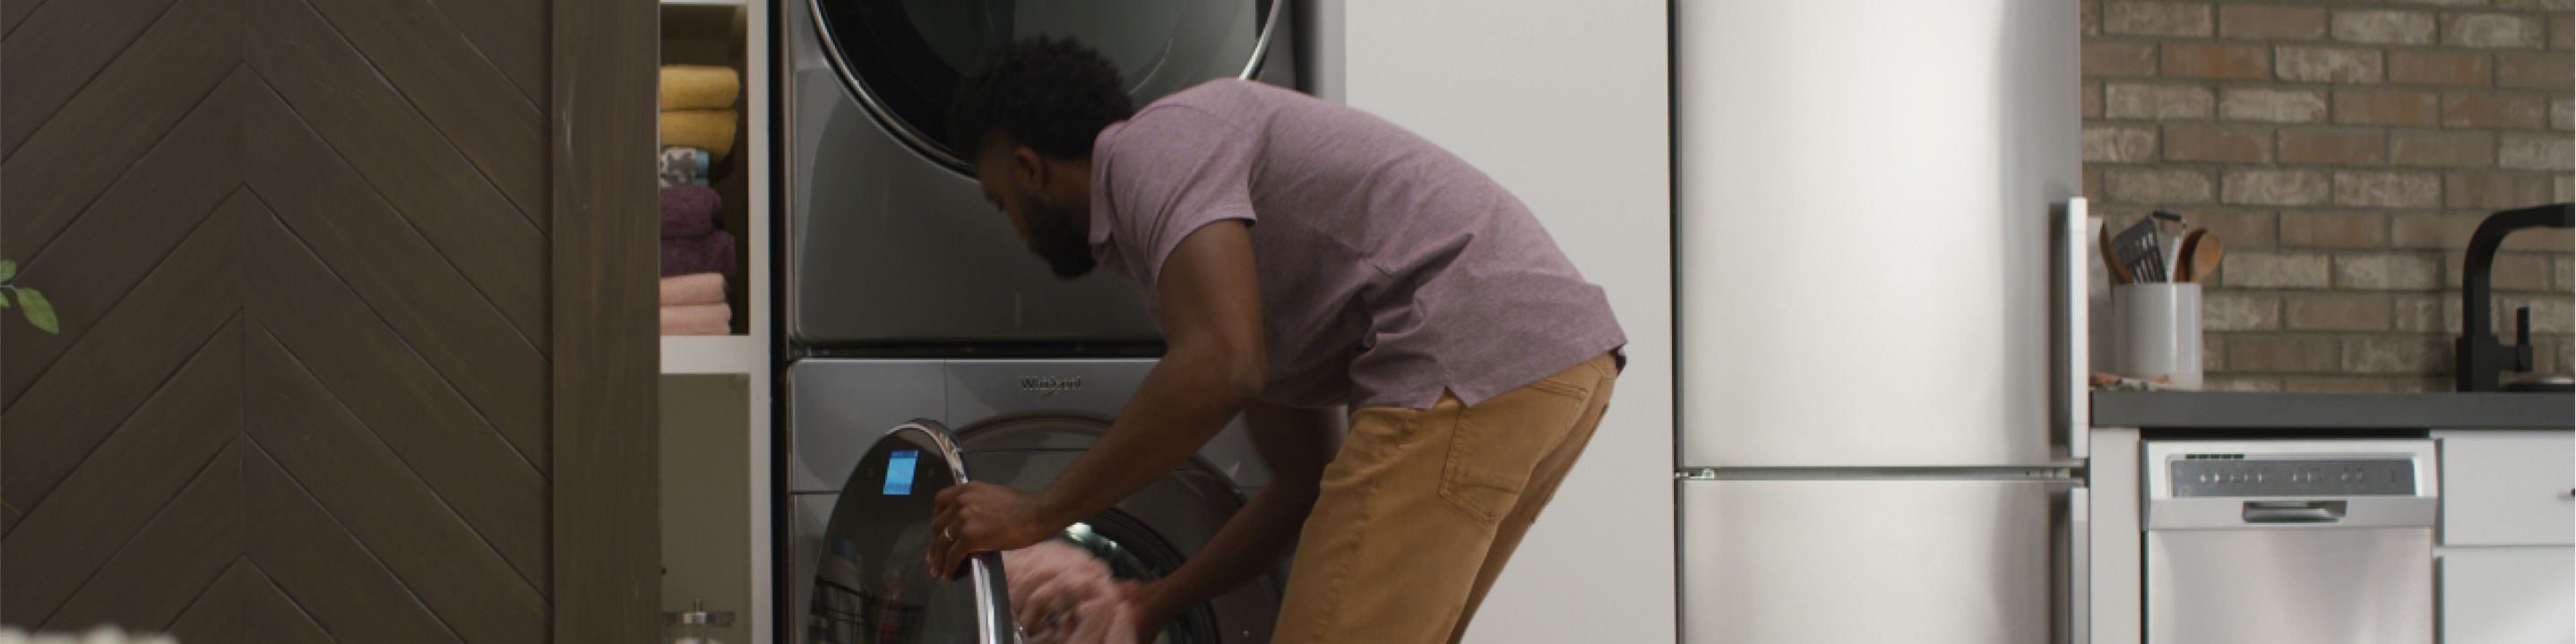 A person loads laundry into a Whirlpool® Stacked Washer & Dryer